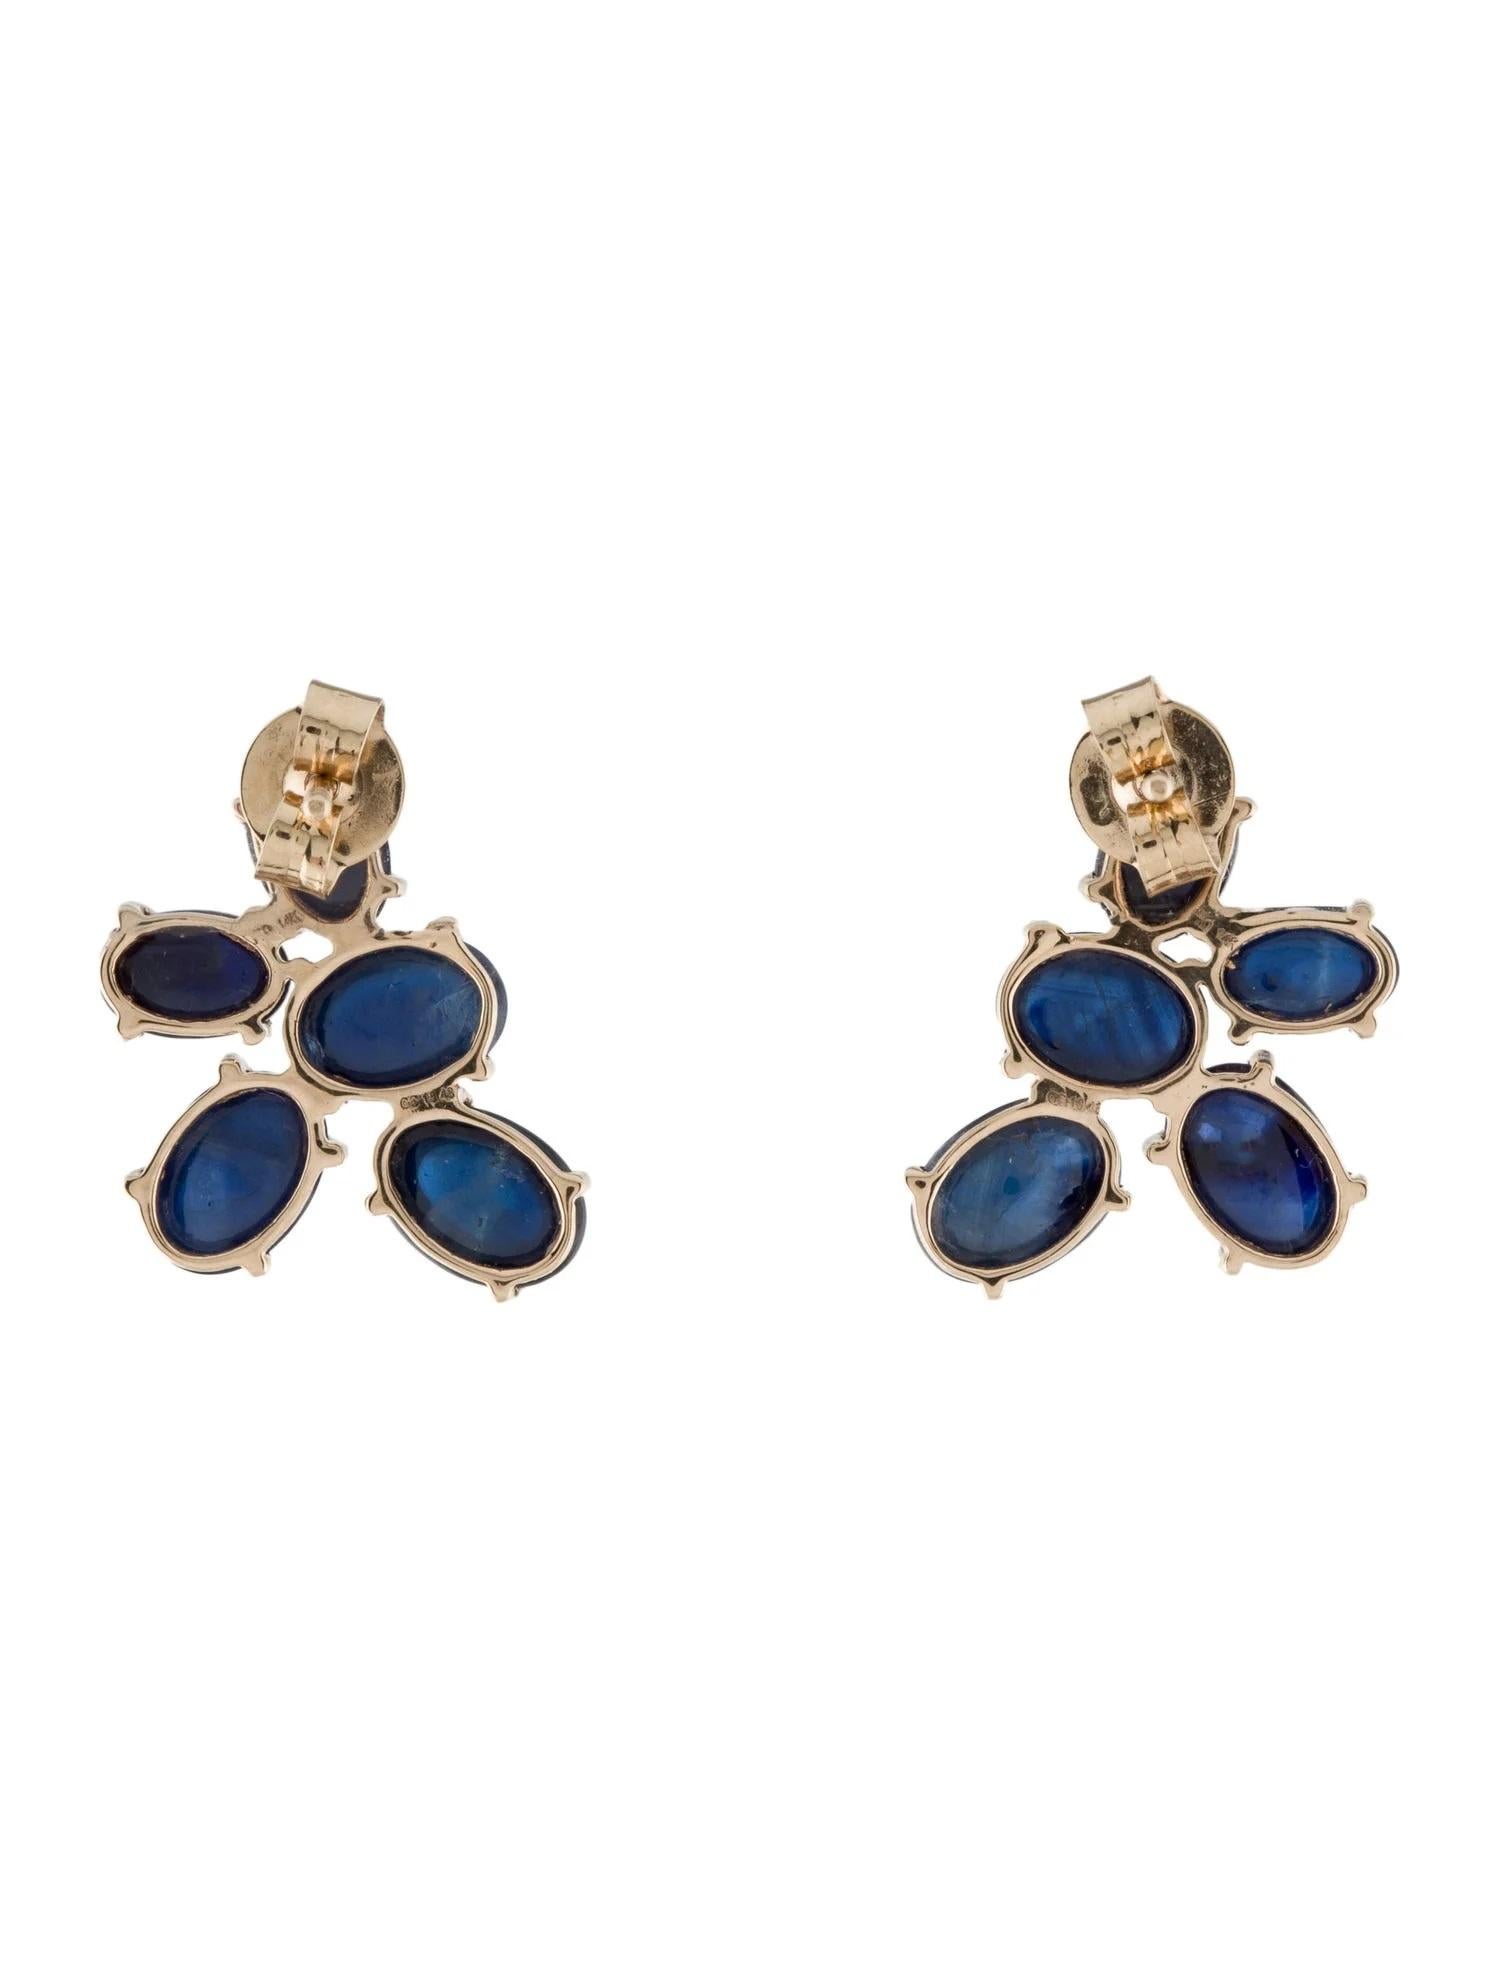 Artist 14K Yellow Gold Sapphire Drop Stud Earrings, 10.44ctw Oval Cabochon Blue Stones For Sale